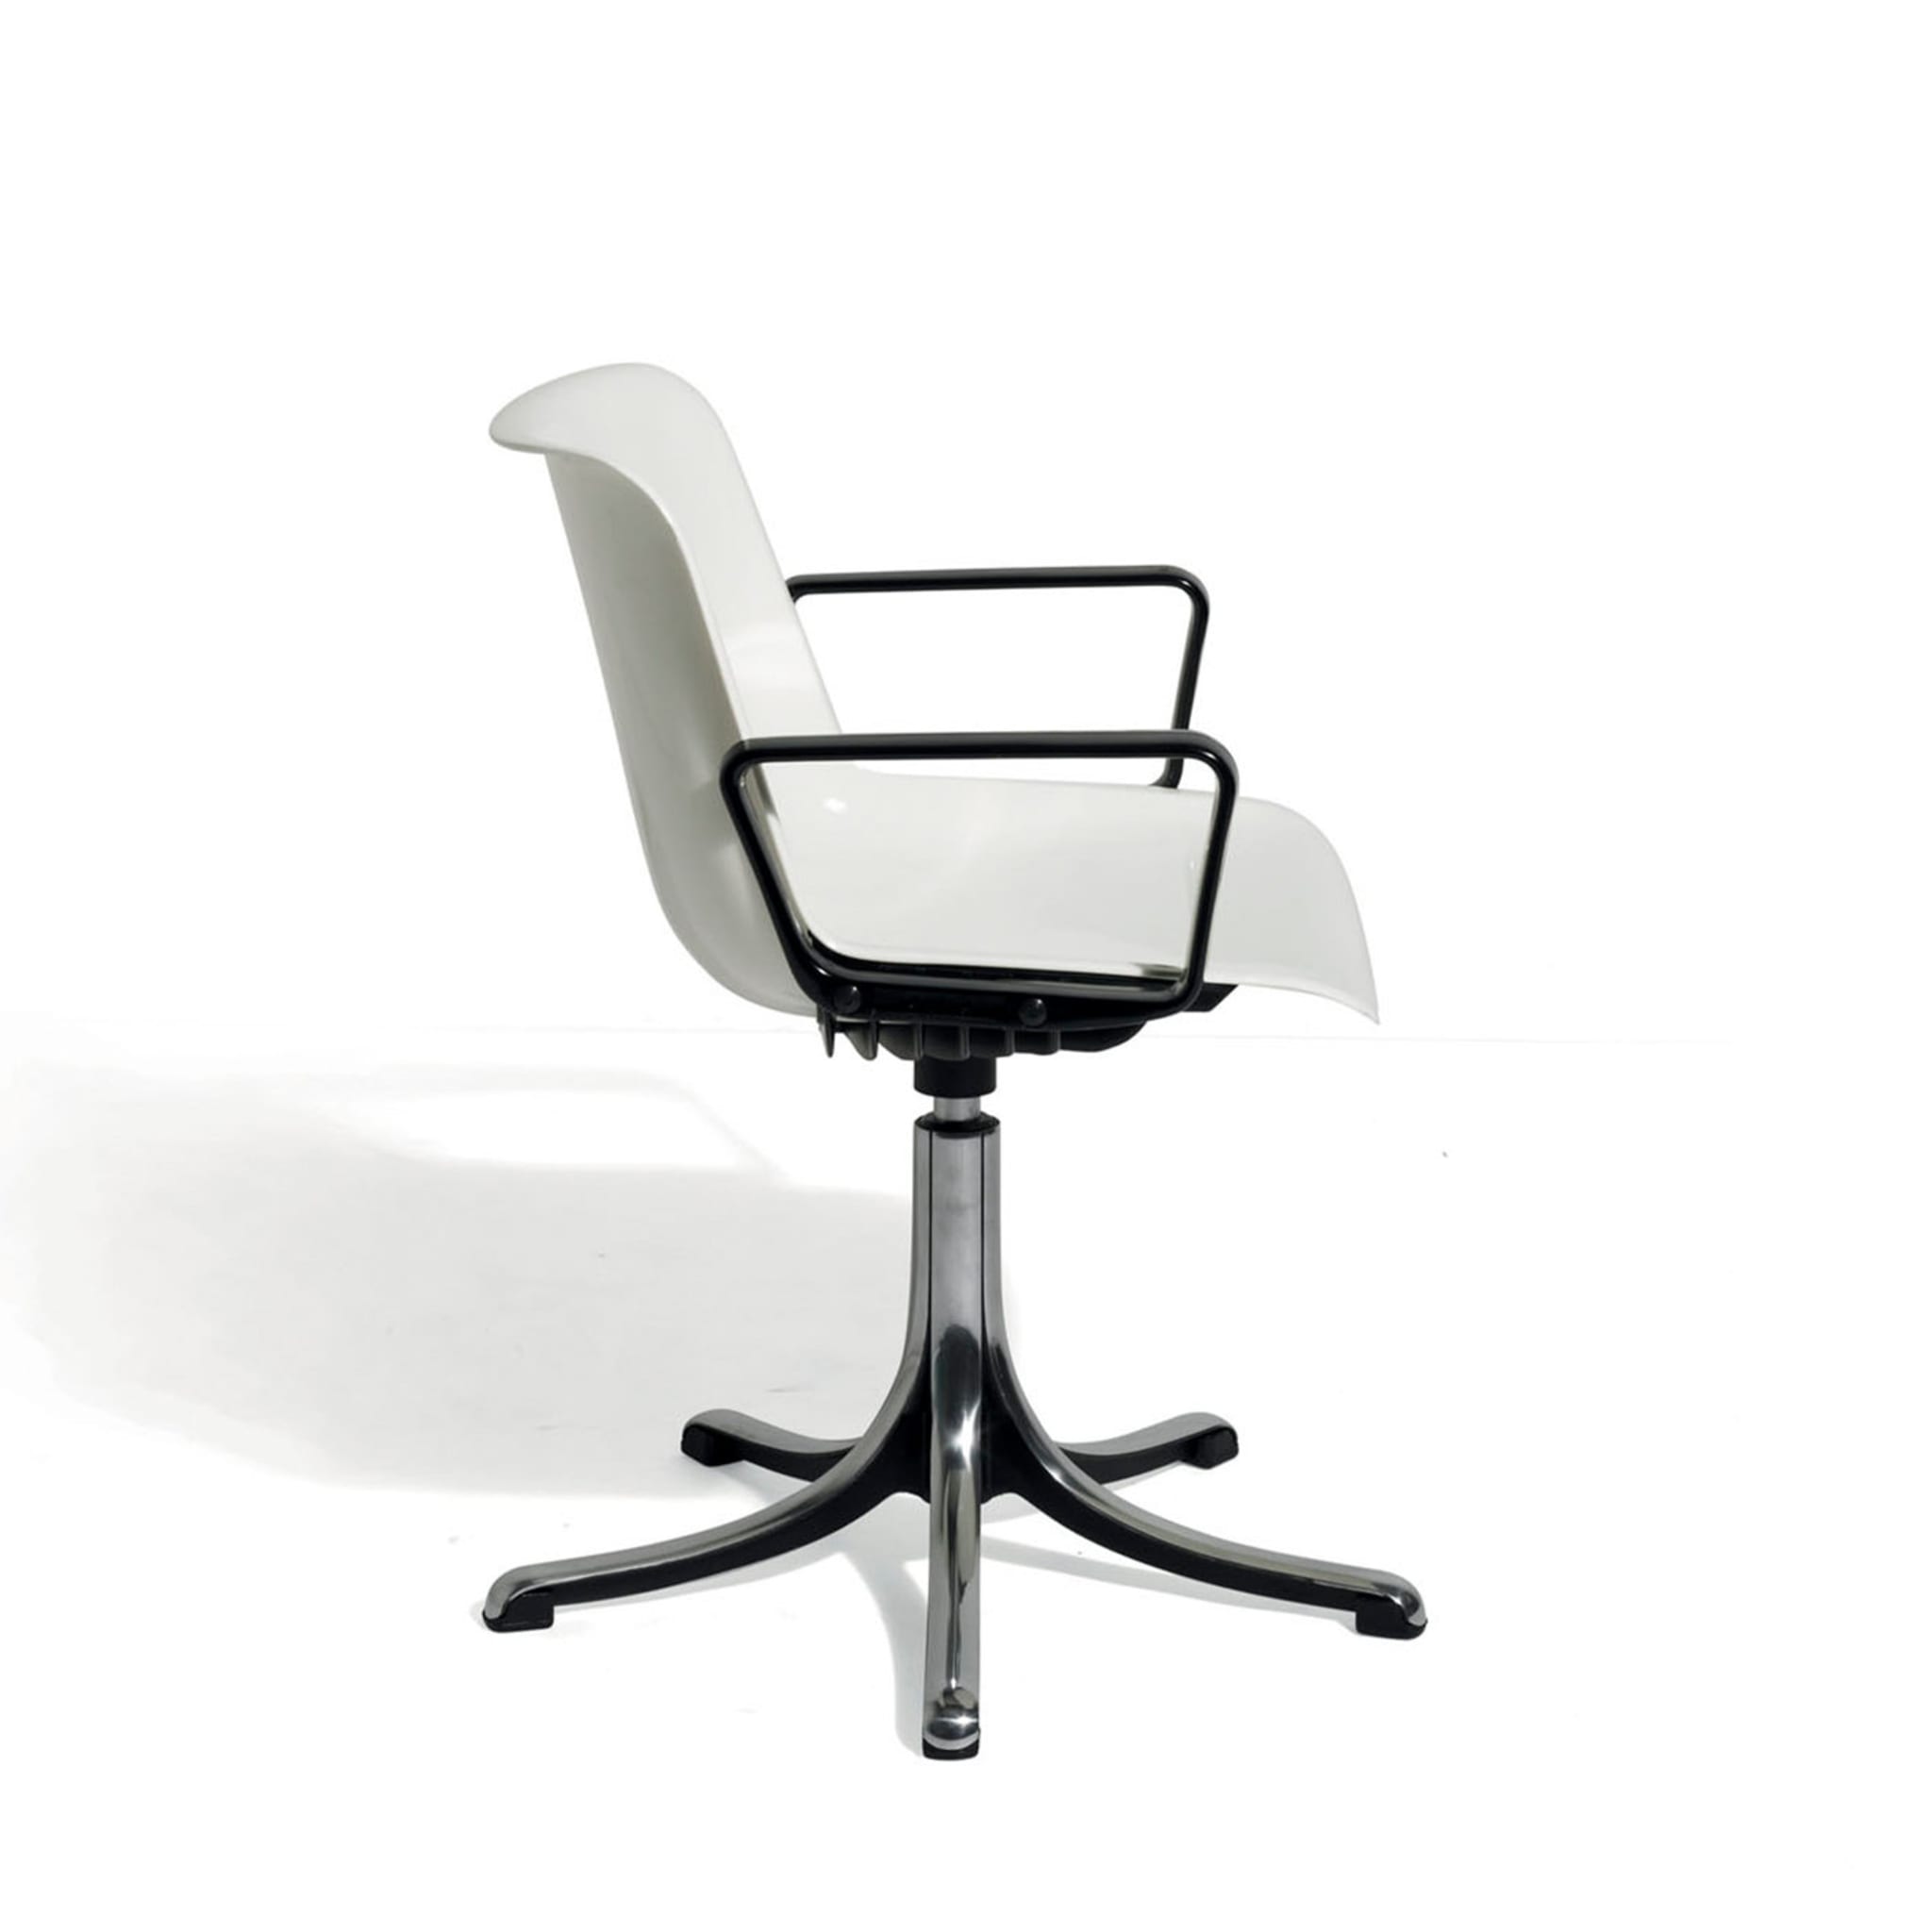 Modus White Chair with Armrests by Centro Progetti Tecno - Alternative view 1